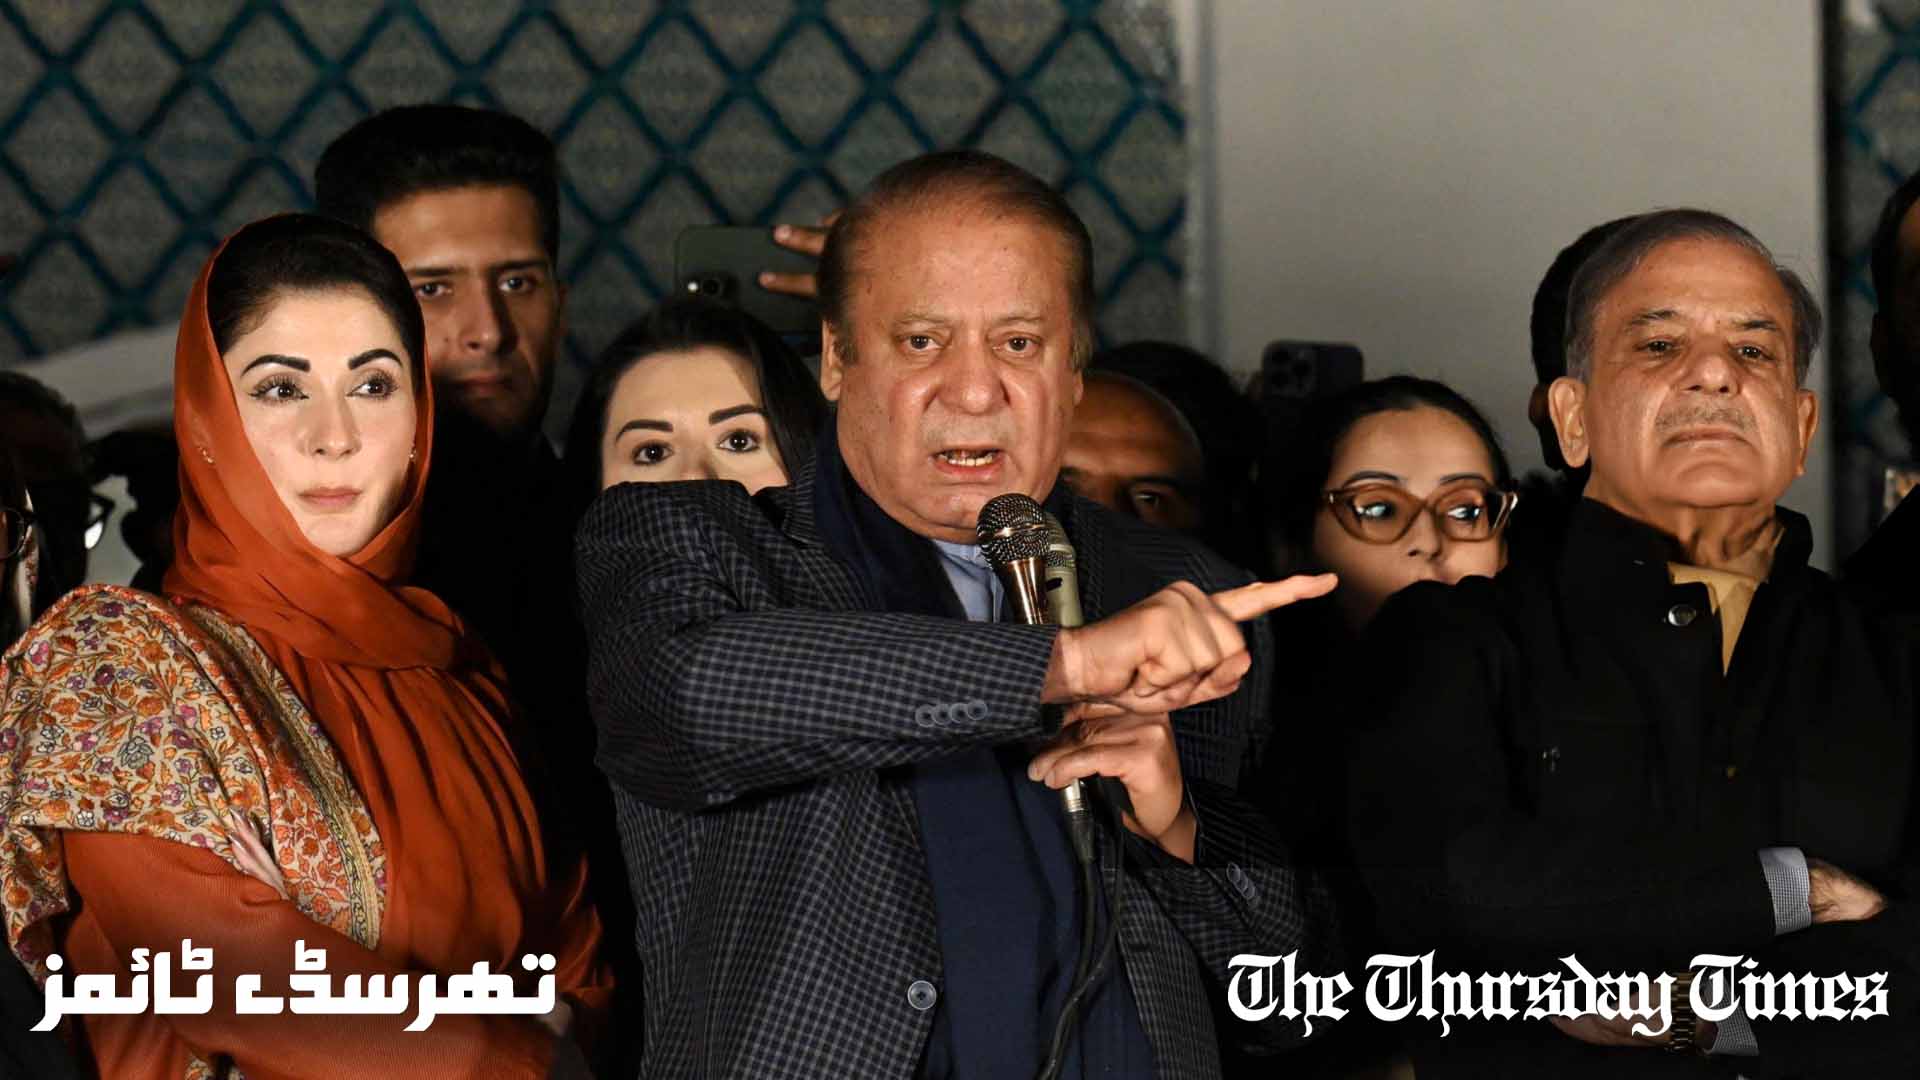 A file photo is shown of former prime minister Nawaz Sharif (C) alongside PML(N) senior vice president Maryam Nawaz (L) and PML(N) president Shehbaz Sharif addressing a gathering of supporters at Lahore on February 9, 2024. — AFP